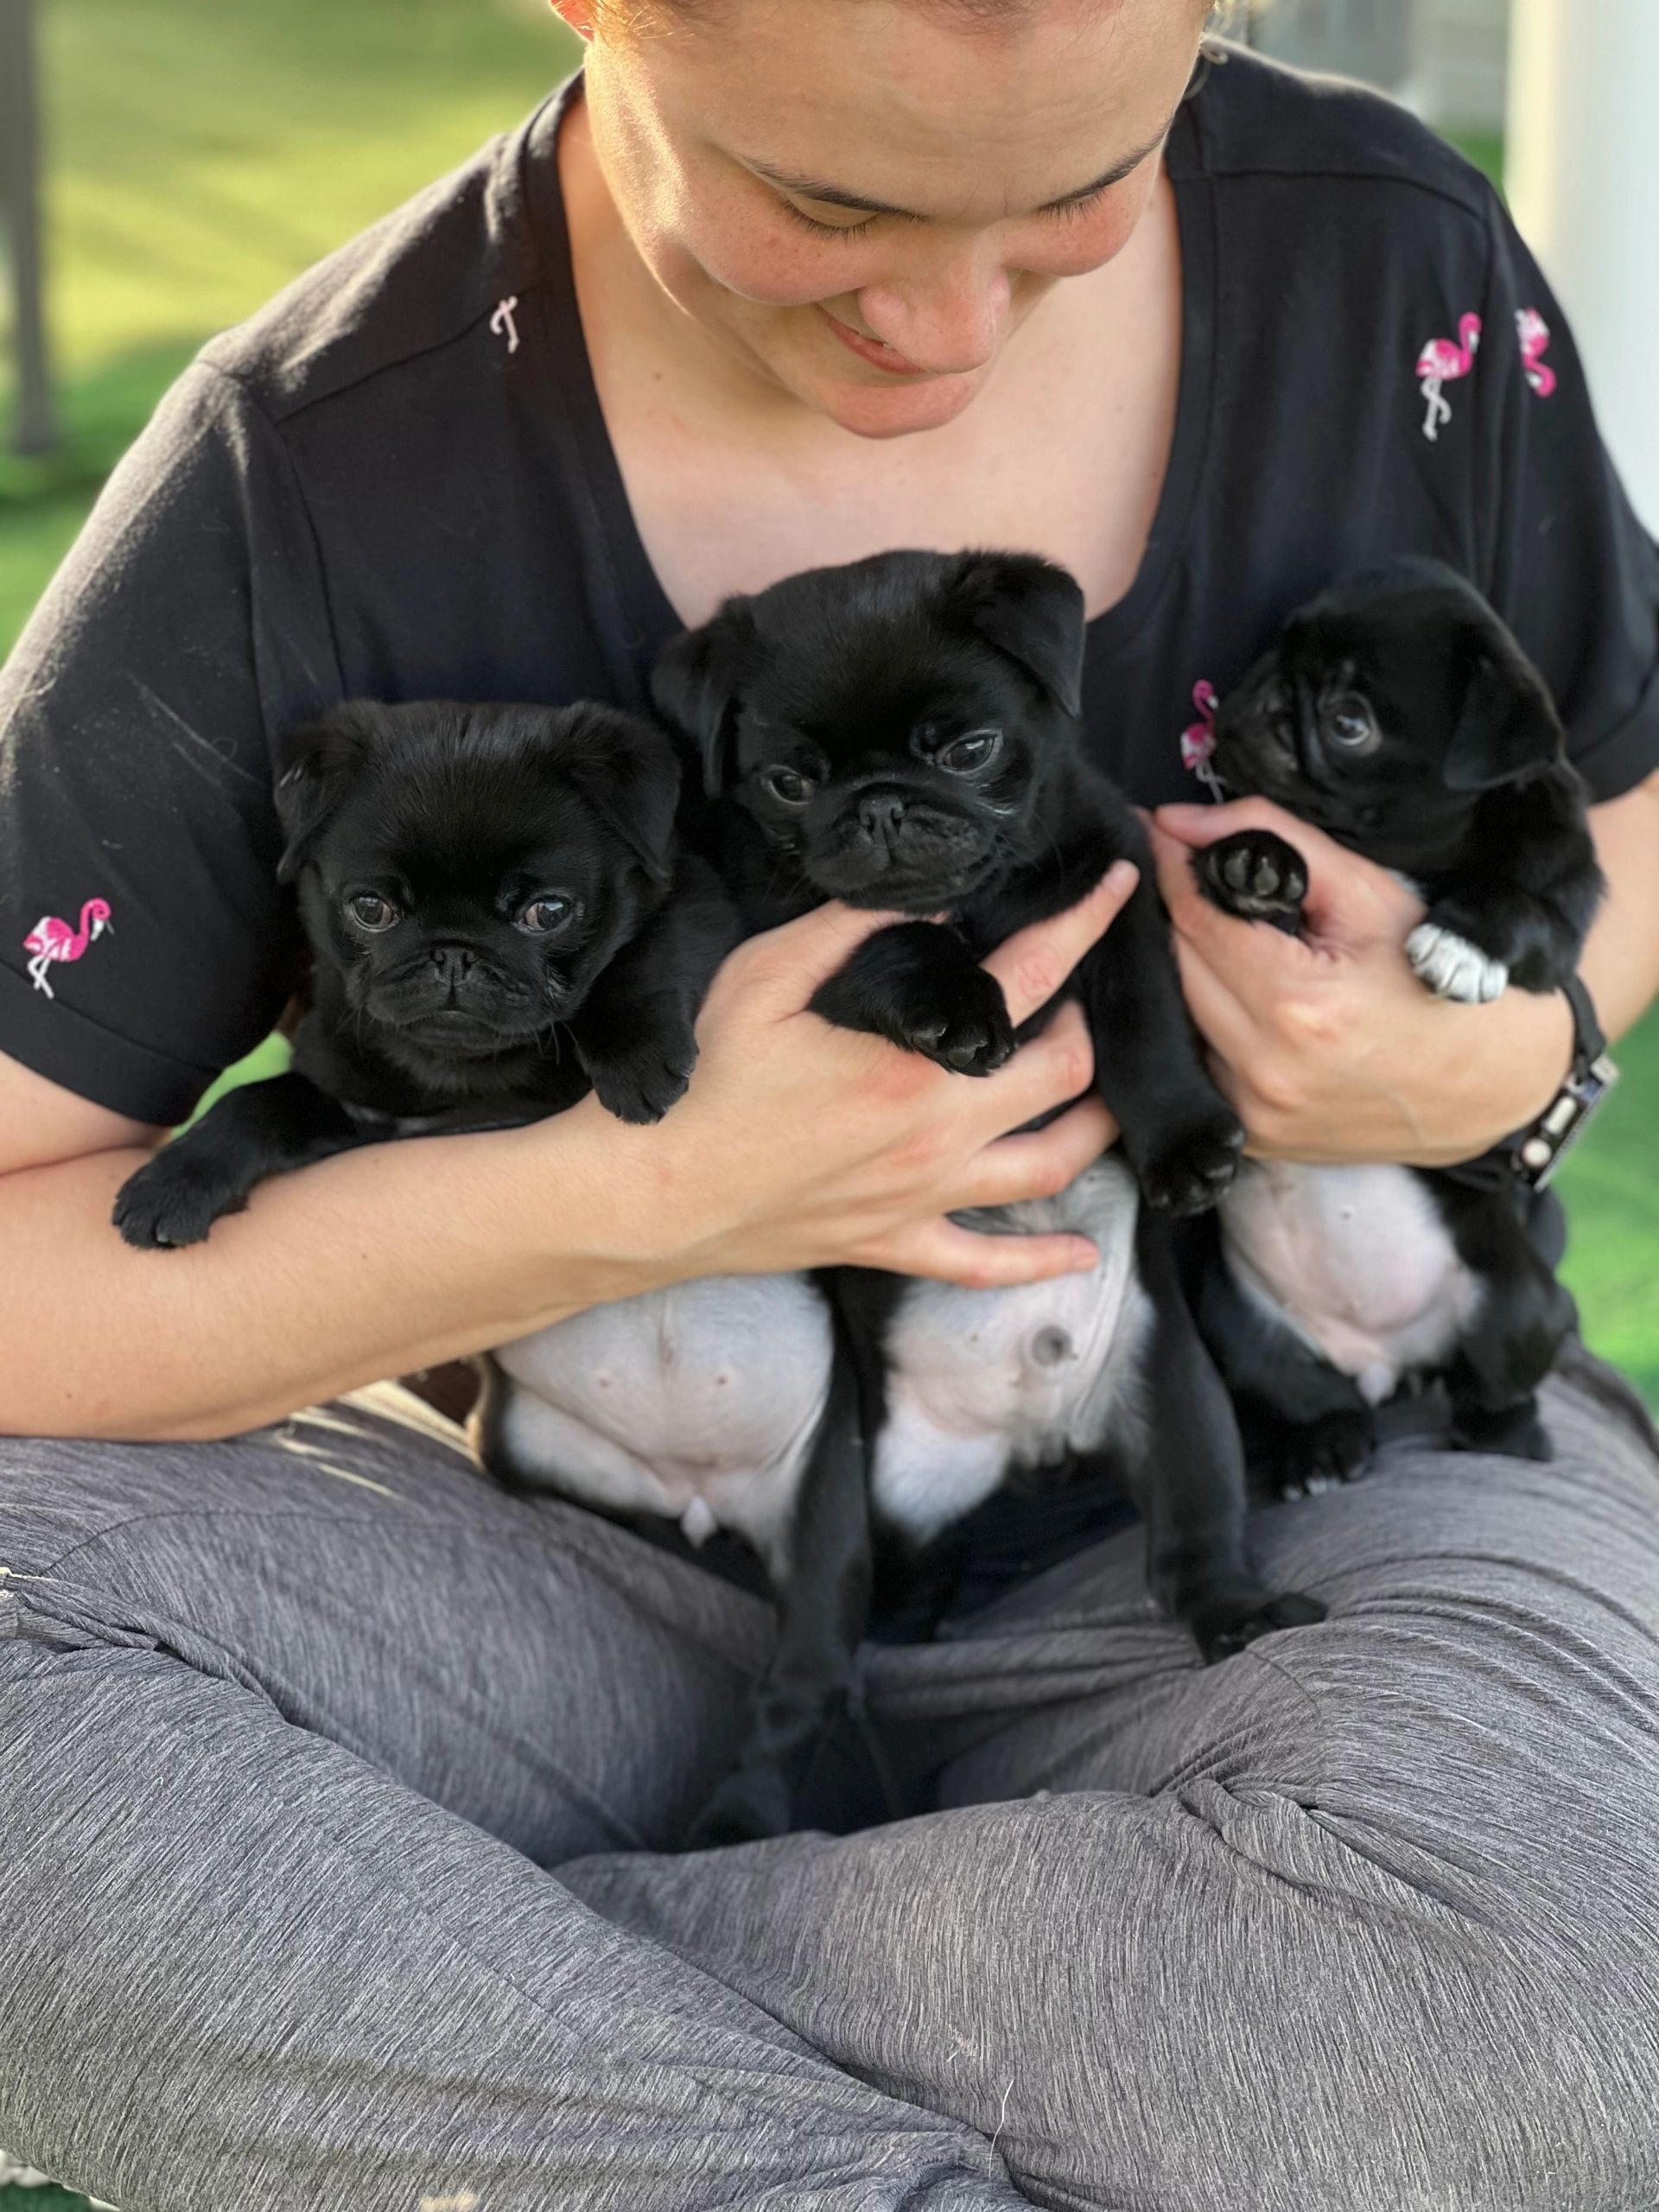 can two fawn pugs make a black pug